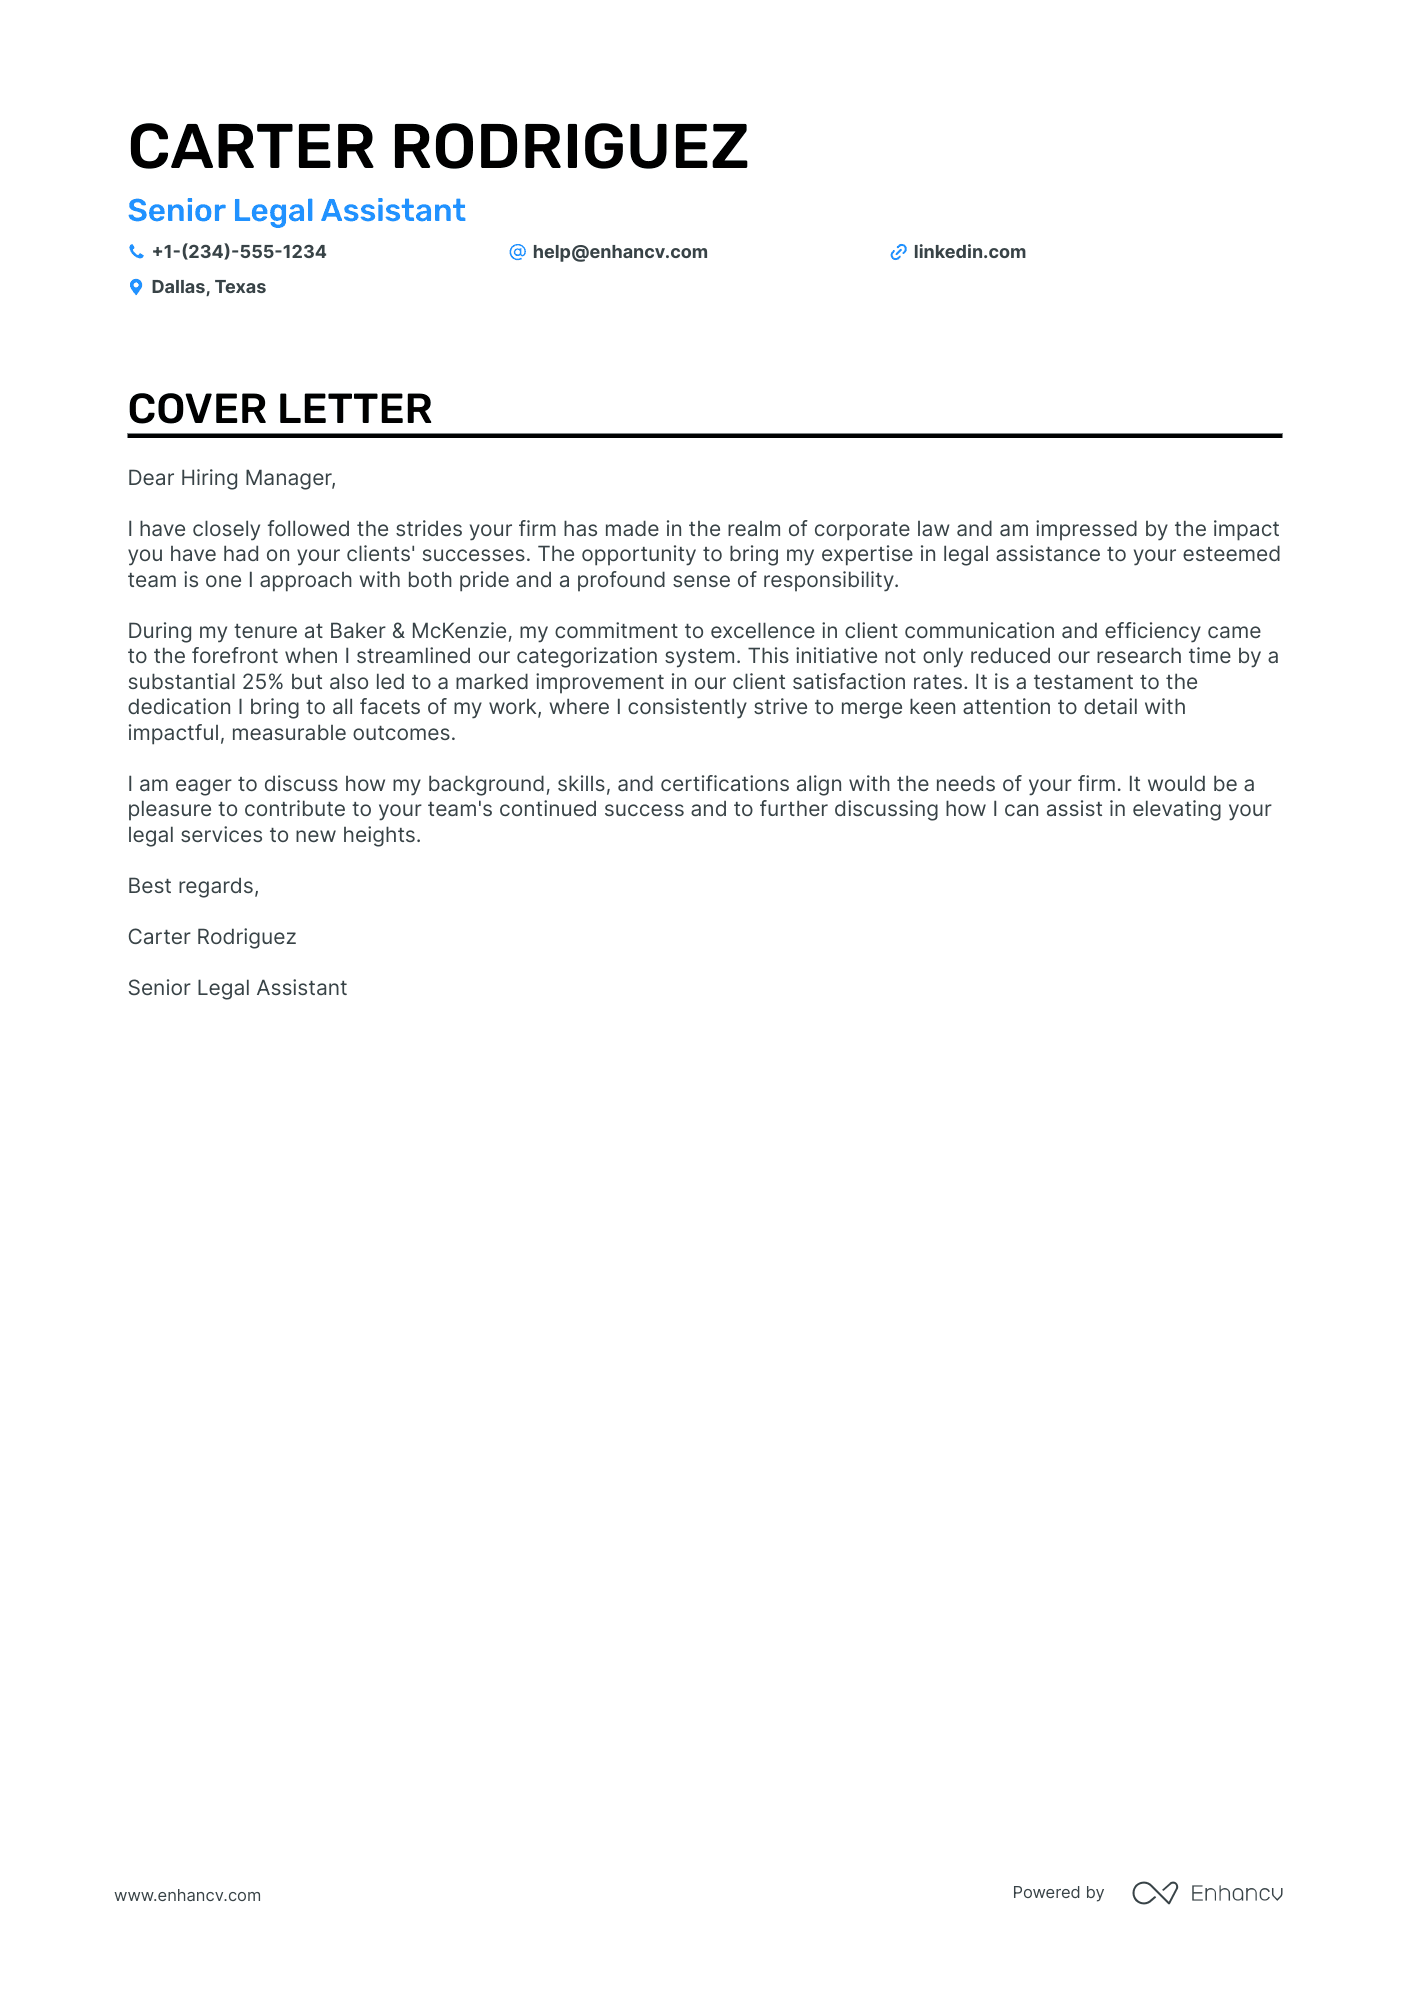 cover letter for resume legal assistant